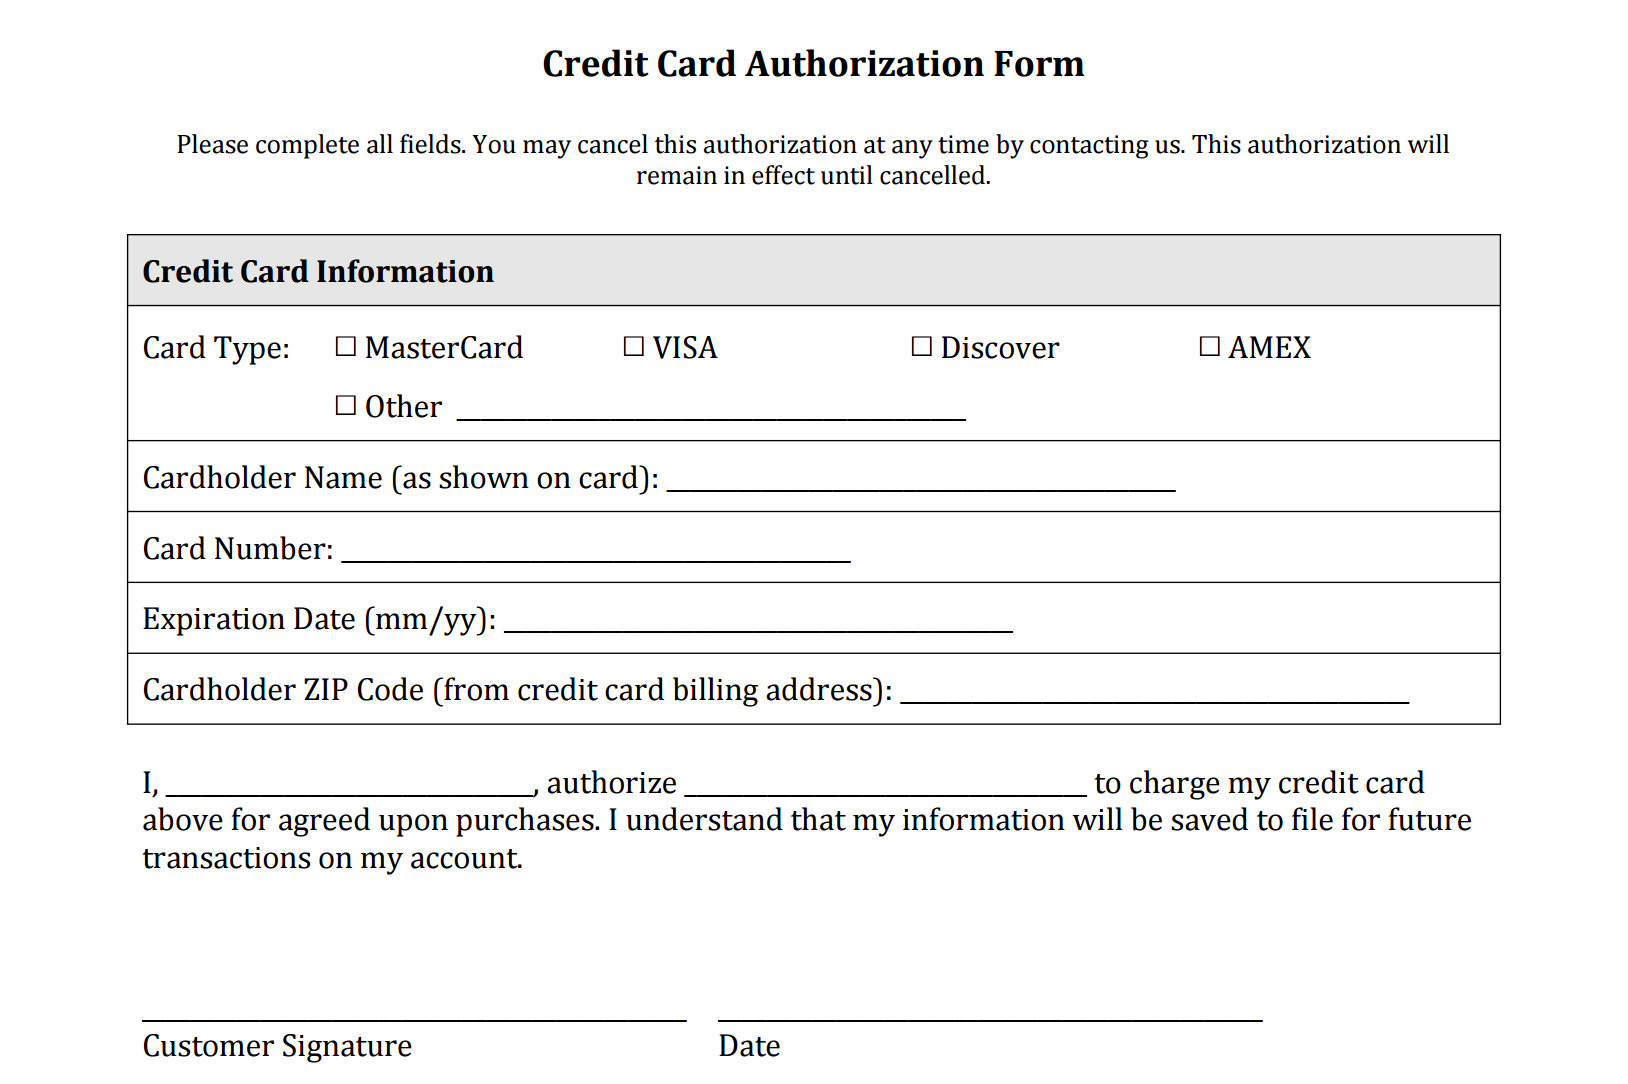 001 Credit Card Authorization Form Template Ideas Surprising In Credit Card Authorization Form Template Word